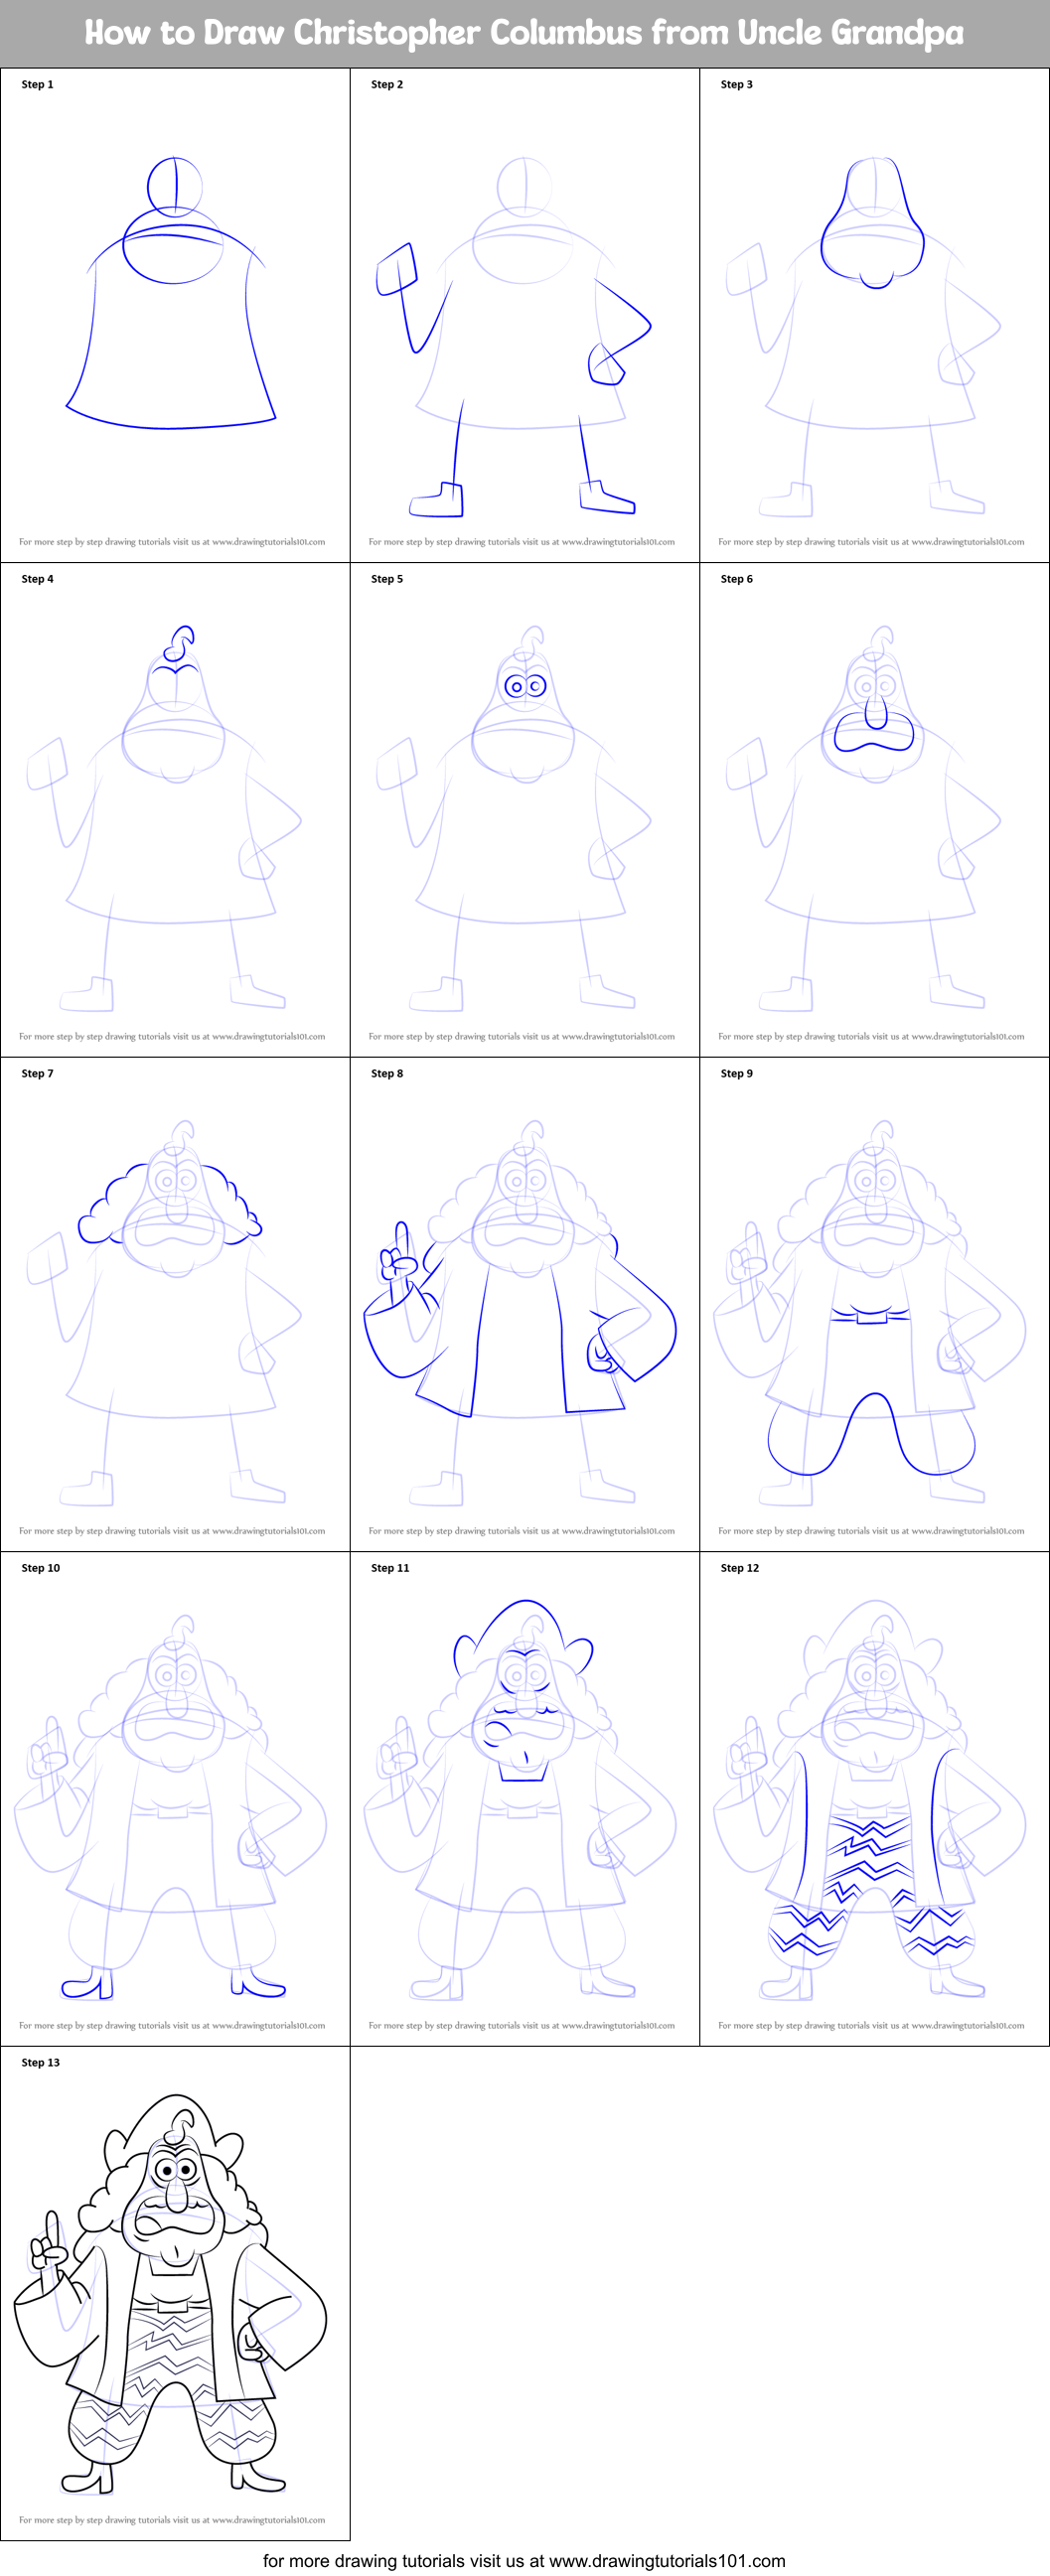 How to Draw Christopher Columbus from Uncle Grandpa printable step by